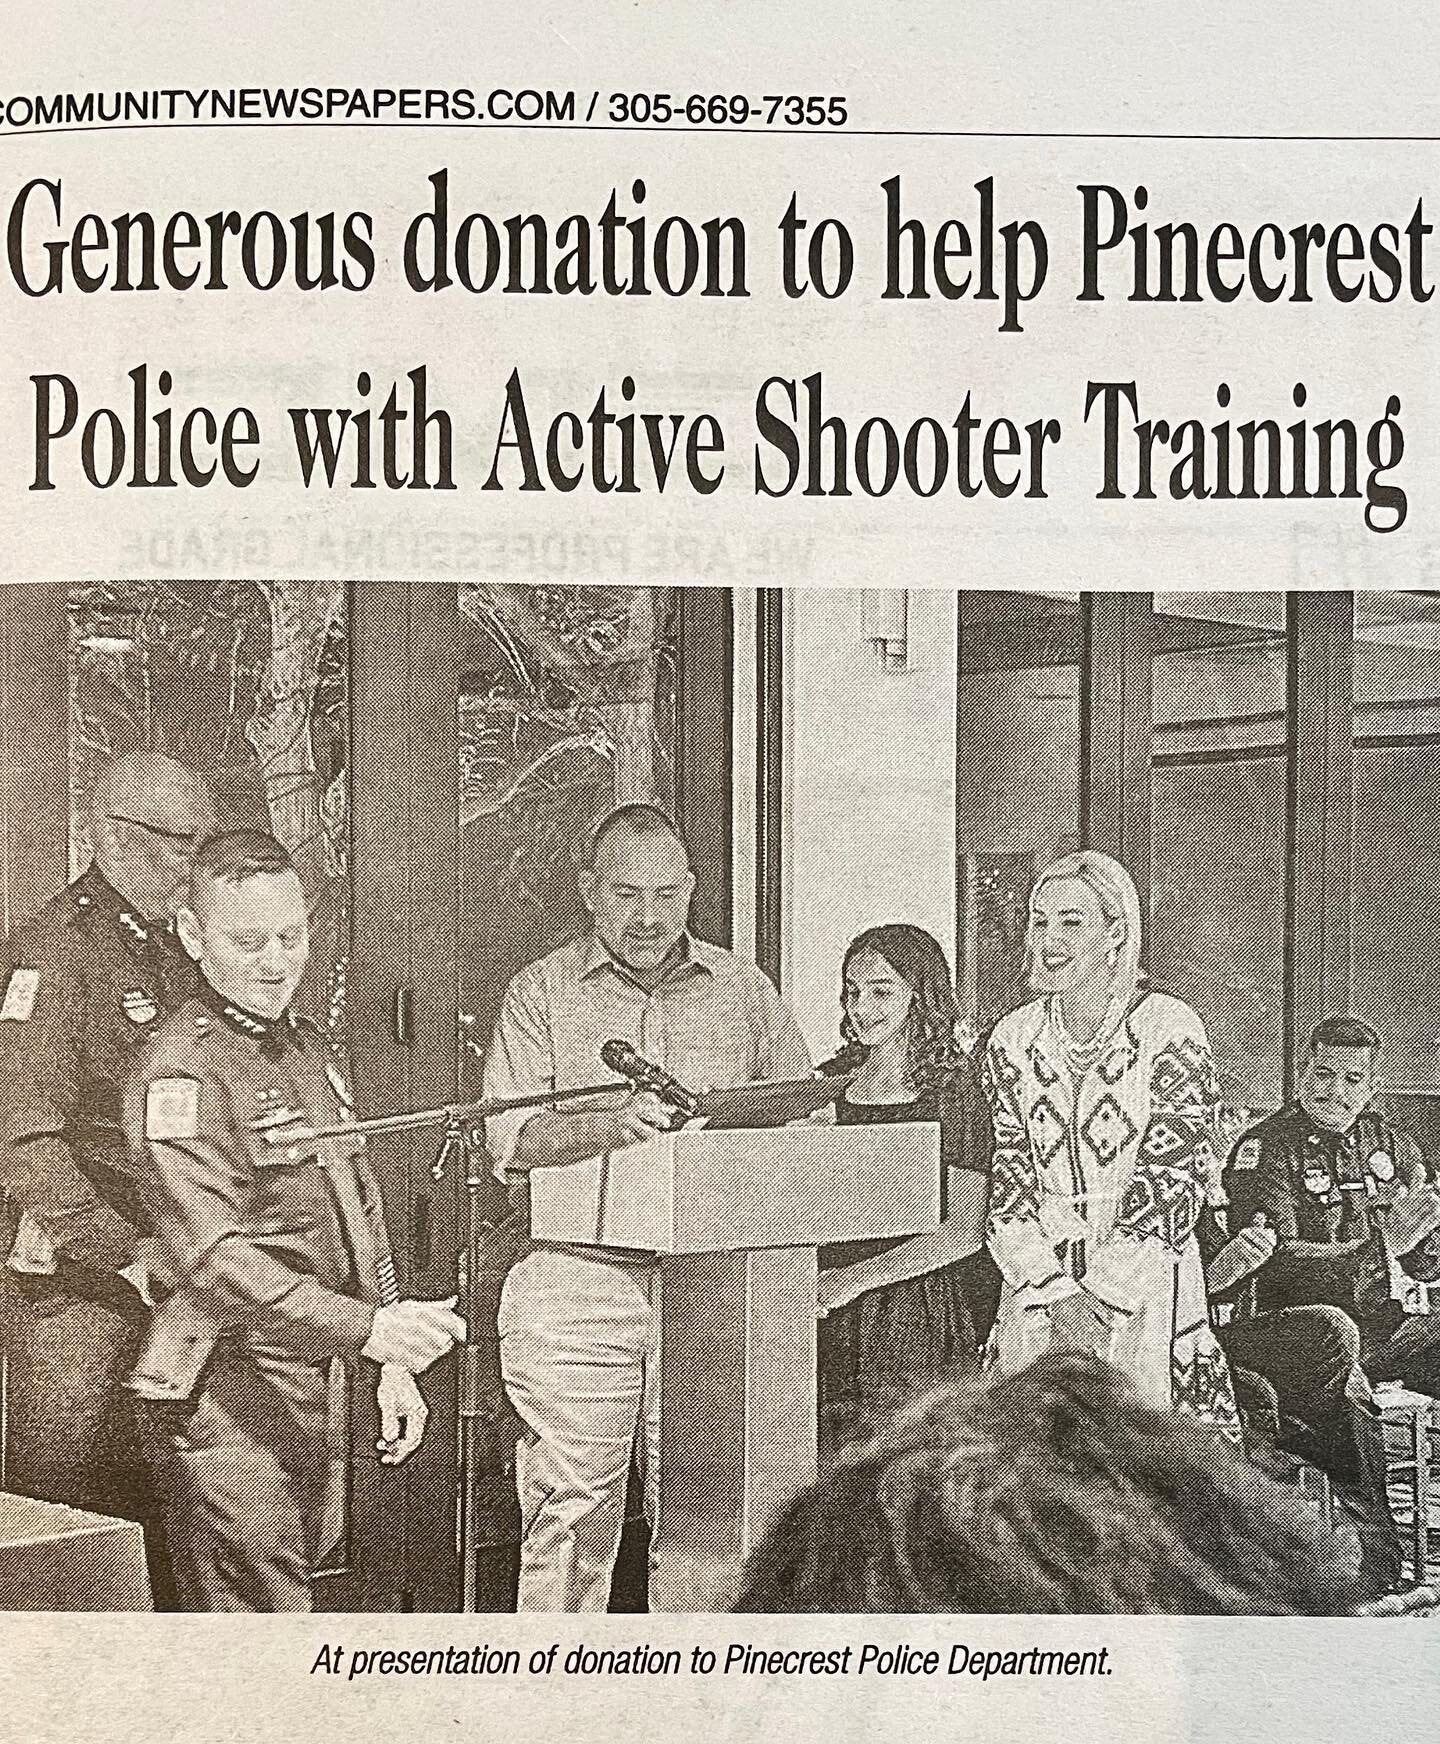 Thanks to @communitynewspapers for spotlighting the importance of supporting the @pinecrestpolice department. #giveback